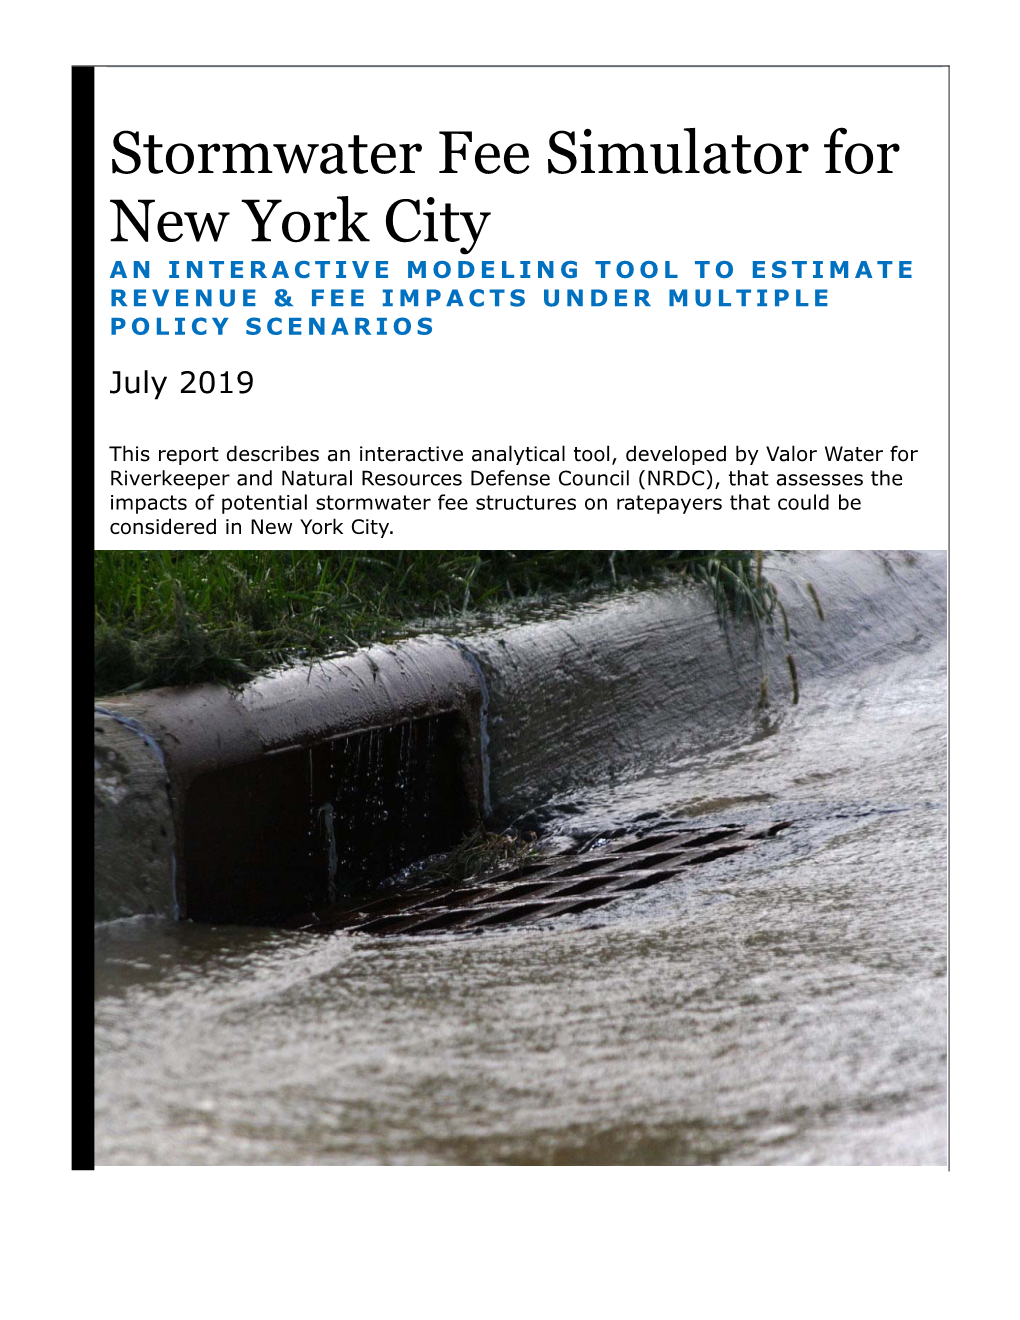 Stormwater Fee Simulator for New York City an INTERACTIVE MODELING TOOL to ESTIMATE REVENUE & FEE IMPACTS UNDER MULTIPLE POLICY SCENARIOS July 2019